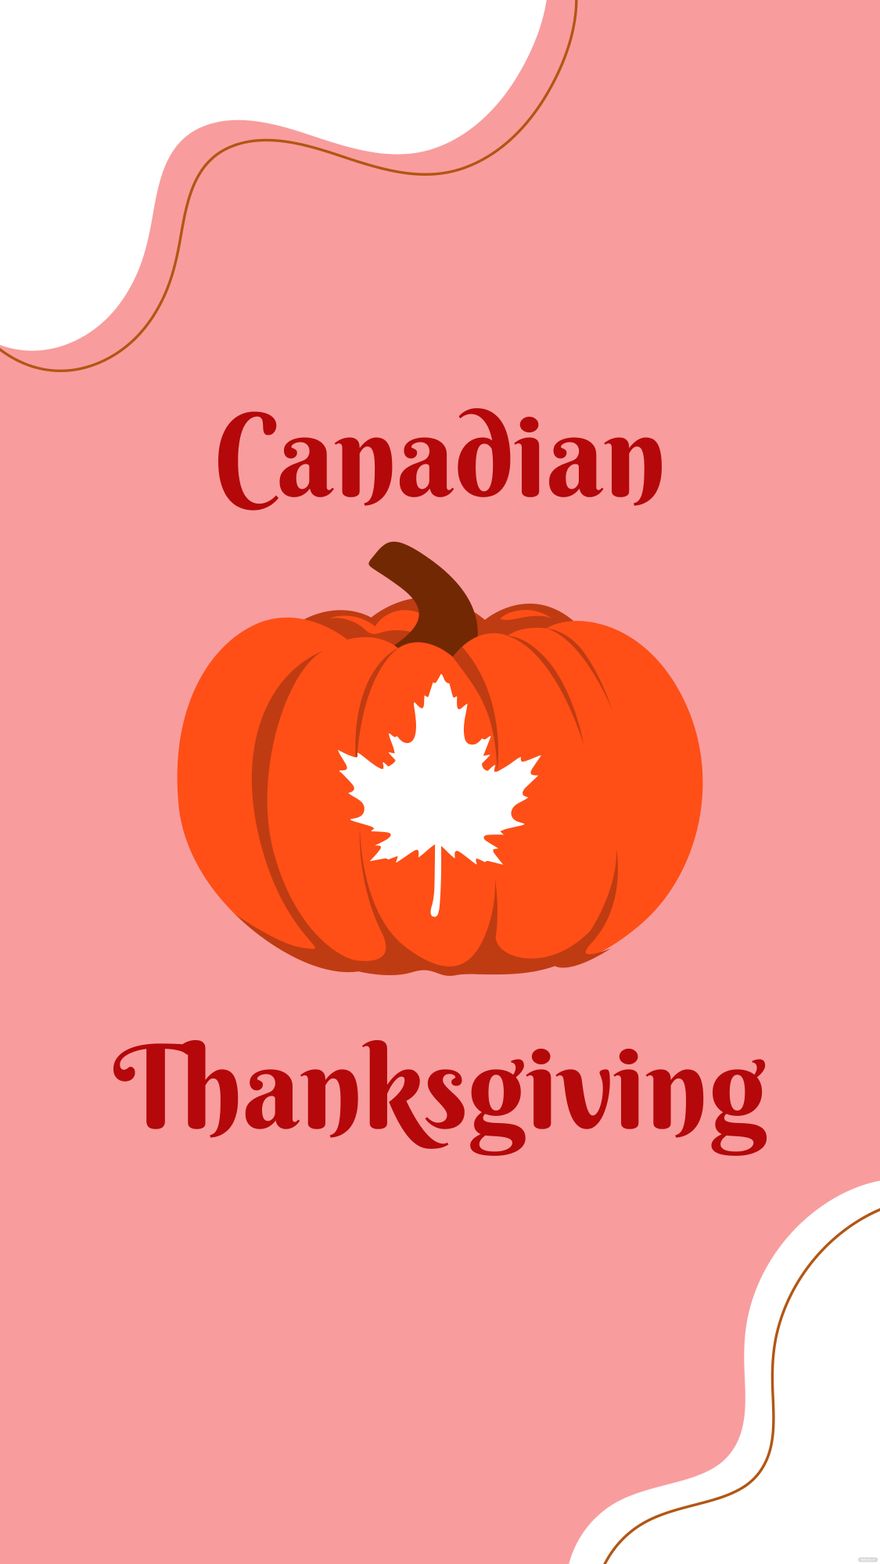 Free Canadian Thanksgiving iPhone Background in PDF, Illustrator, PSD, EPS, SVG, JPG, PNG